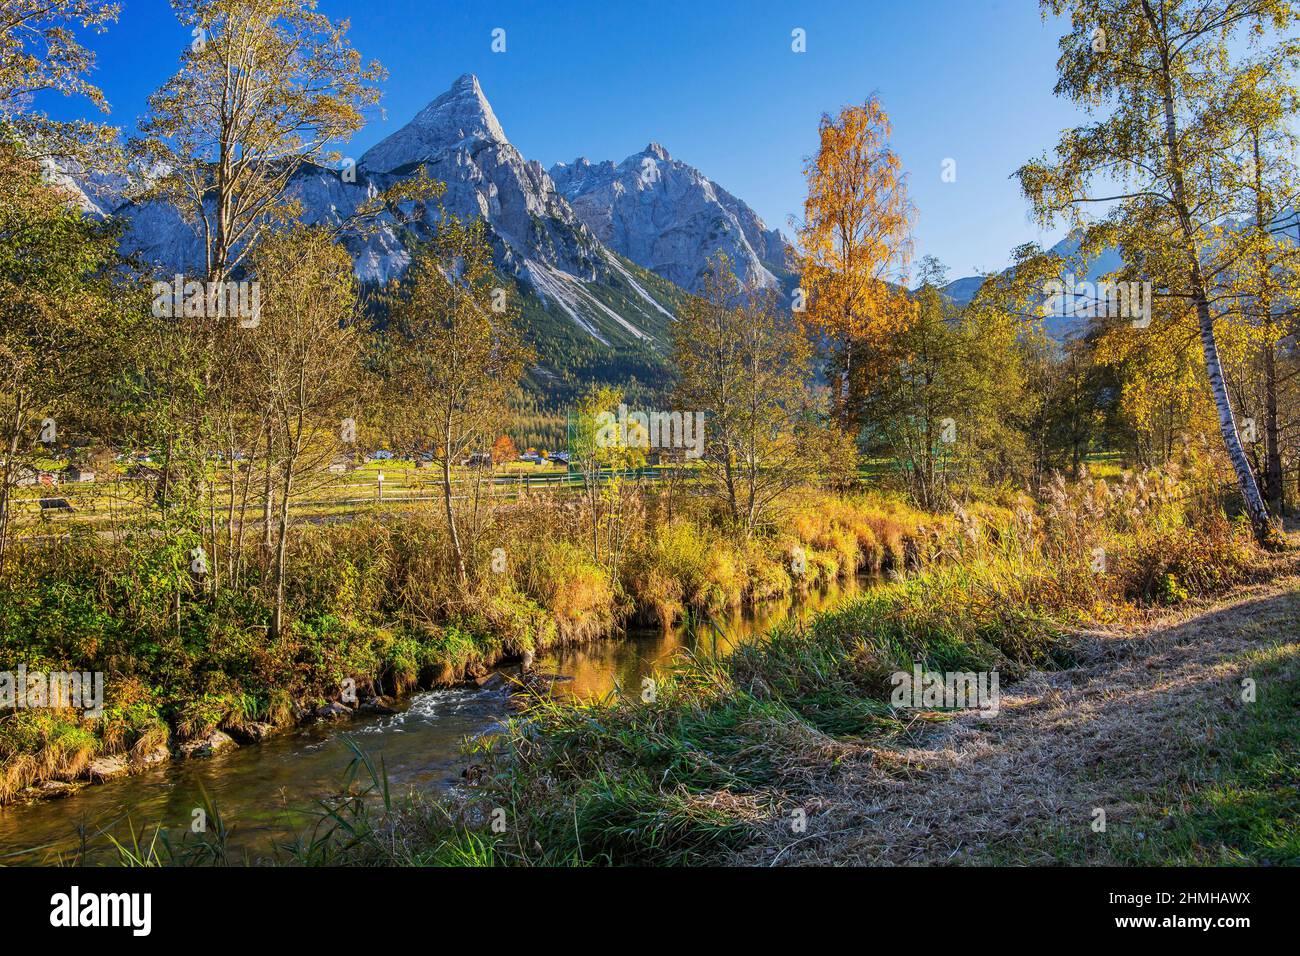 Autumn landscape with a brook in the Lermooser Moos against the Sonnenspitze 2417m in the Mieminger chain, Ehrwald, Loisachtal, Tyrol, Austria Stock Photo